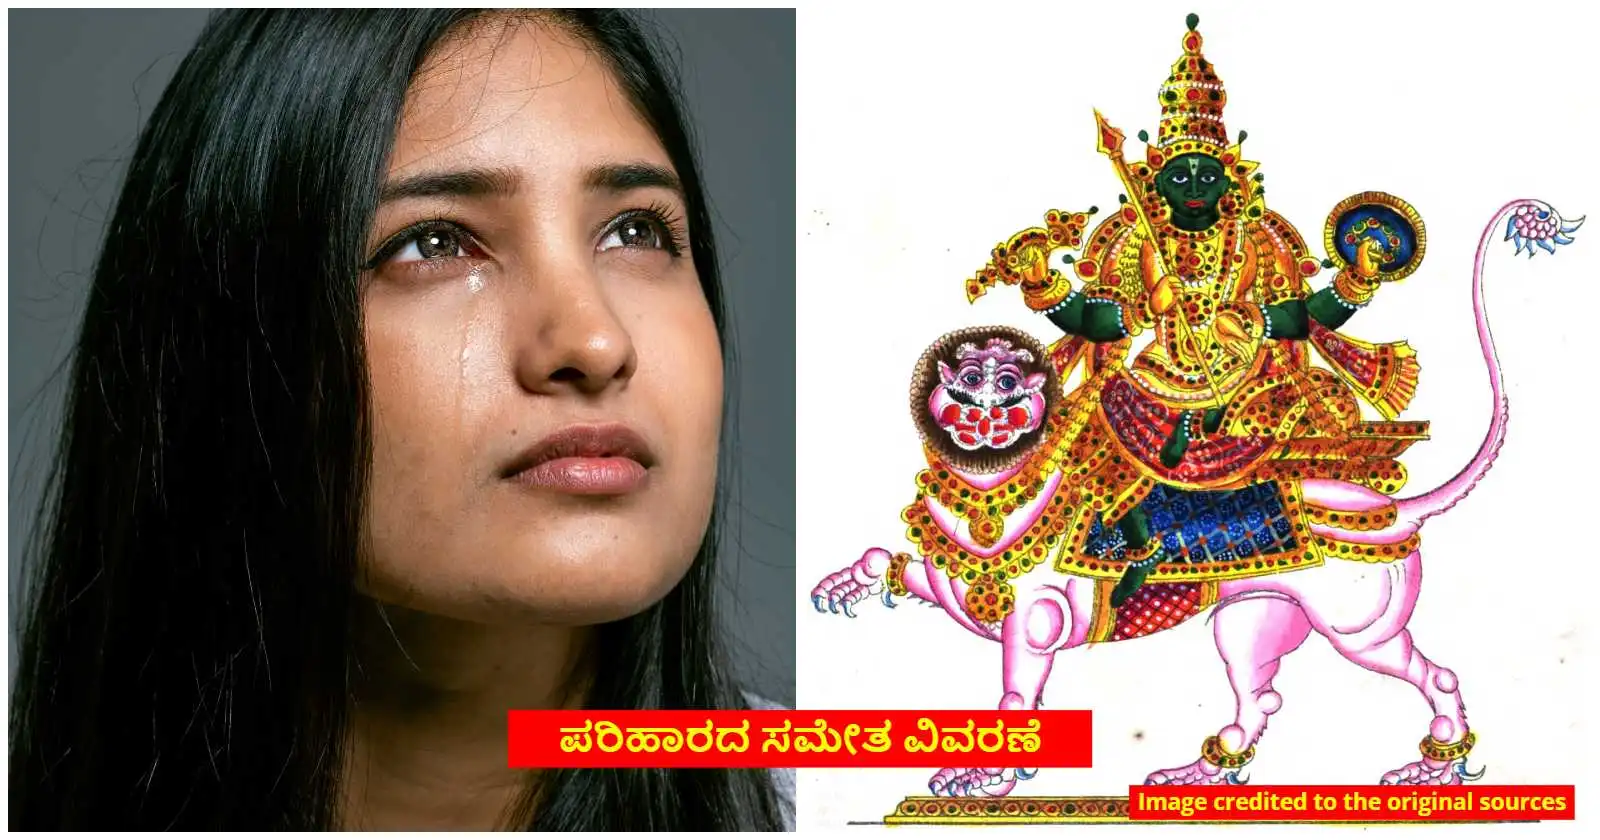 Kannada Horoscope Predictions for Next 18 months - Below is the 18 months horoscope predictions of Gemini, Virgo and Aquarius signs.